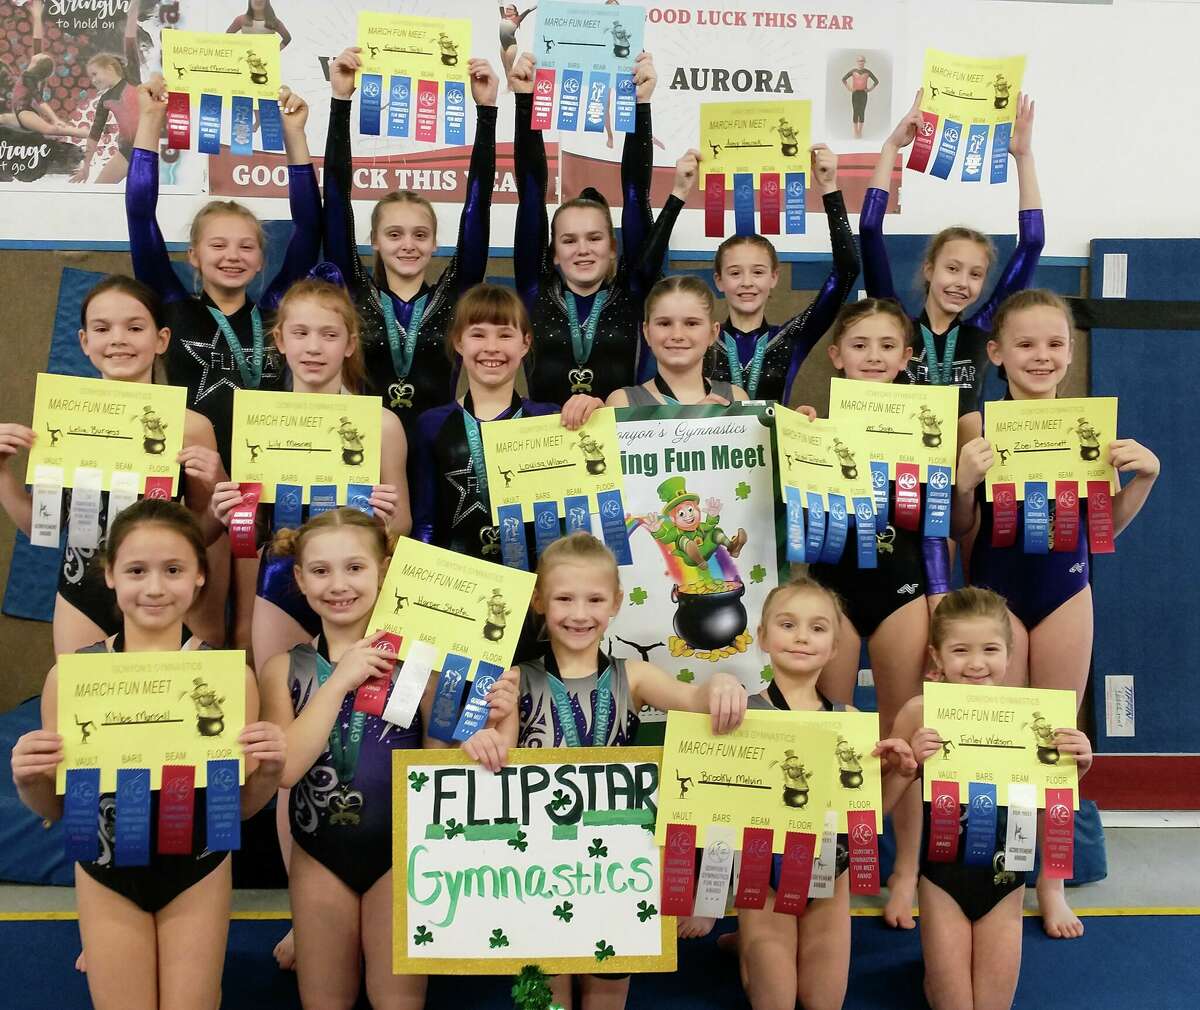 Flipstar Gymnastics had 16 gymnasts, several of them first time competitors, compete in a fun meet recently. These Flipstar gymnasts are from Ludington, Manistee, Freesoil, Baldwin, Pentwater, Muskegon, Custer and surrounding areas. Picture from left to right: (Back Row): Zoei Bessonett, Sydney Morrissey, Avery Heacock, Jade Emick, Nina Frick, Kaydence Taibl, Louisa Wilson, Bristol Jabrocki, River SayaFront Row: Harper Stepka, Brooklyn Melvin, Finley Watson, Khloe Munsell, Lily Meaney, Lelia Burgess and Gretchen Reed.  